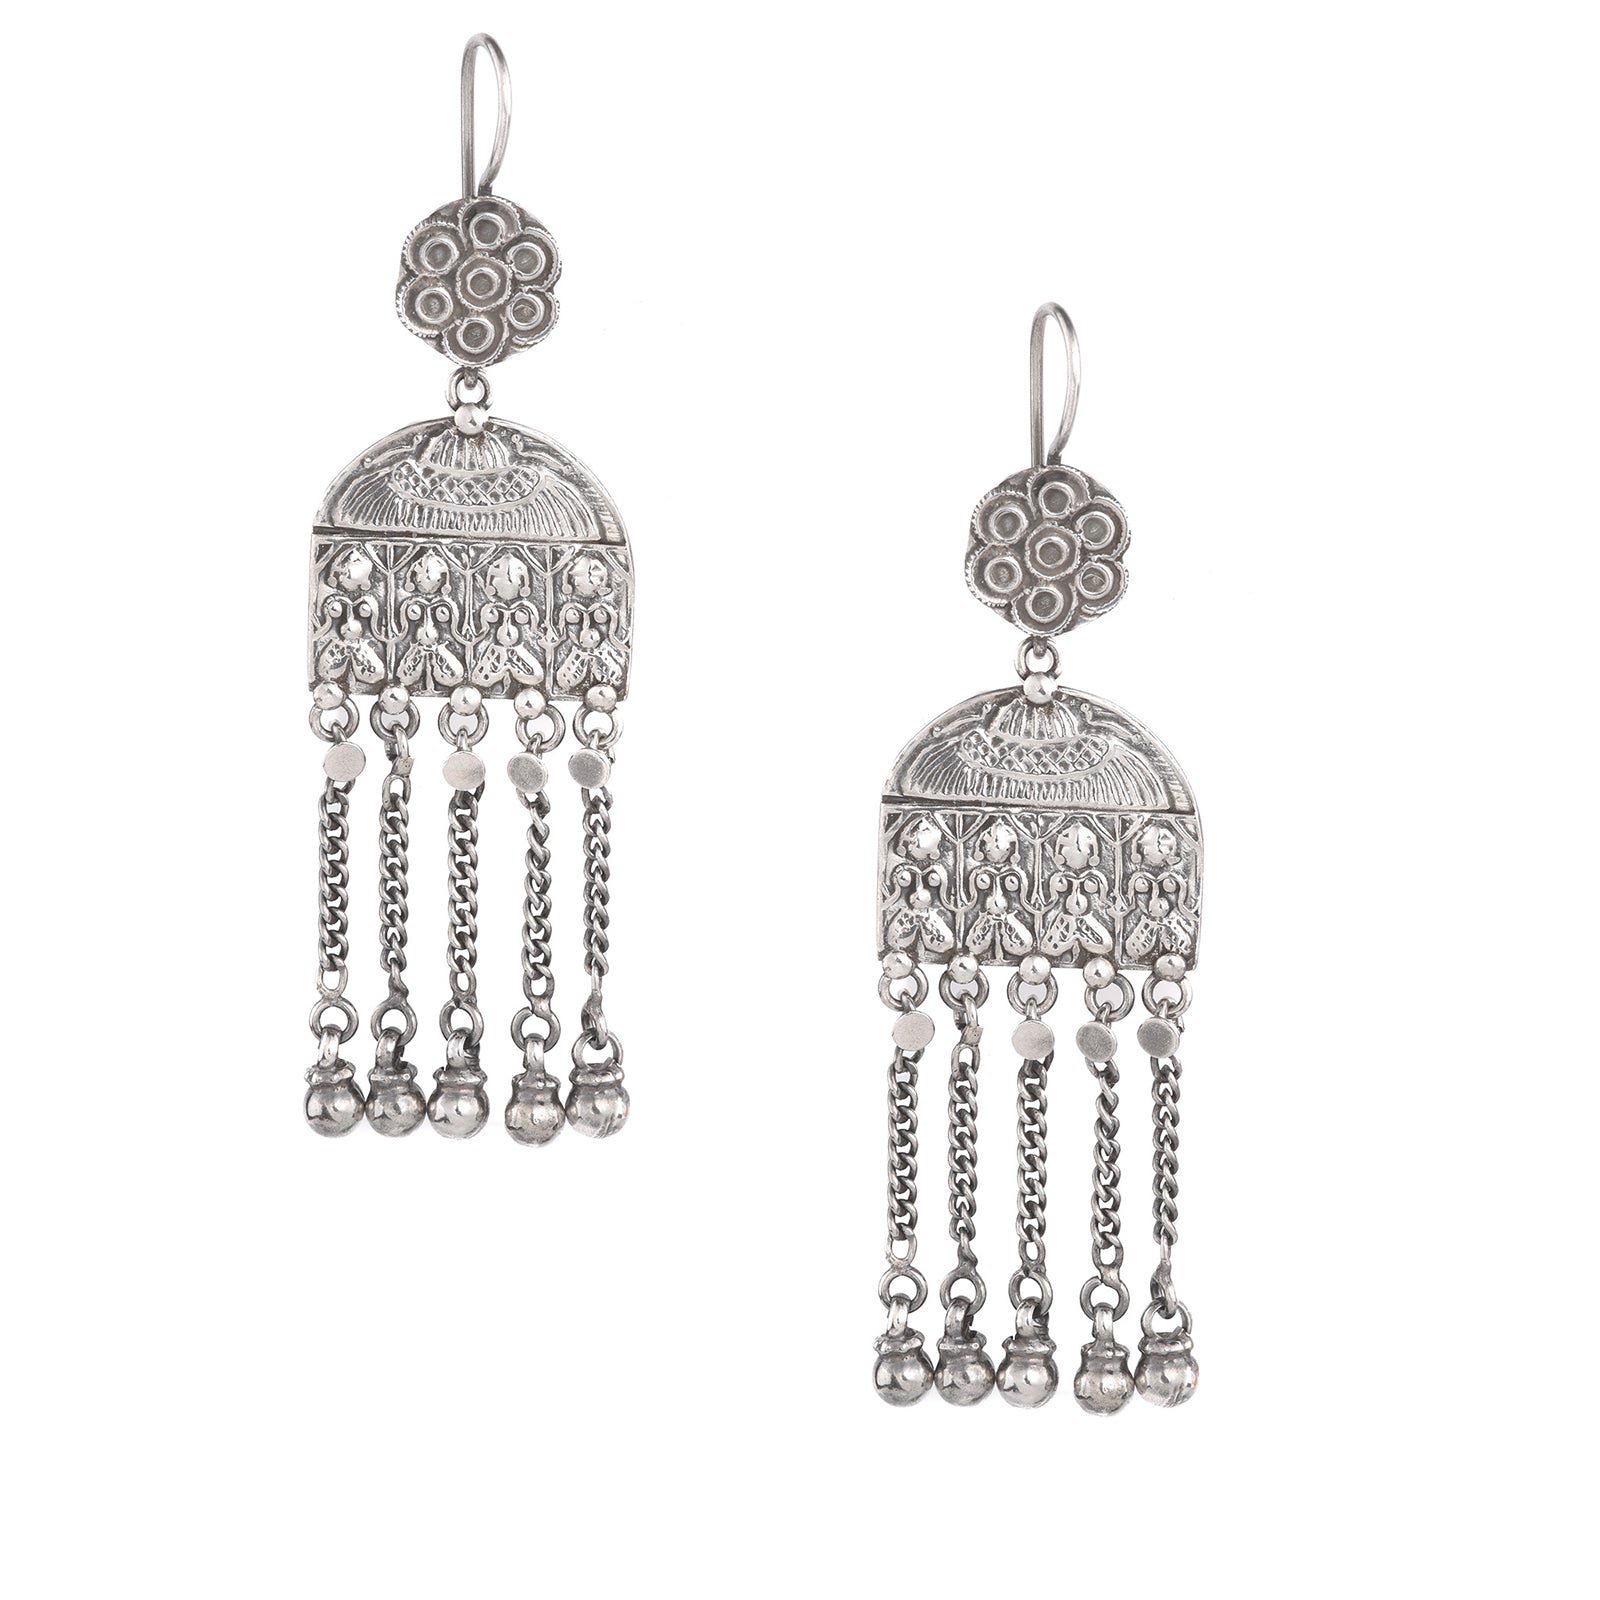 Tribal Silver Repousse Earrings | Indigo Antiques